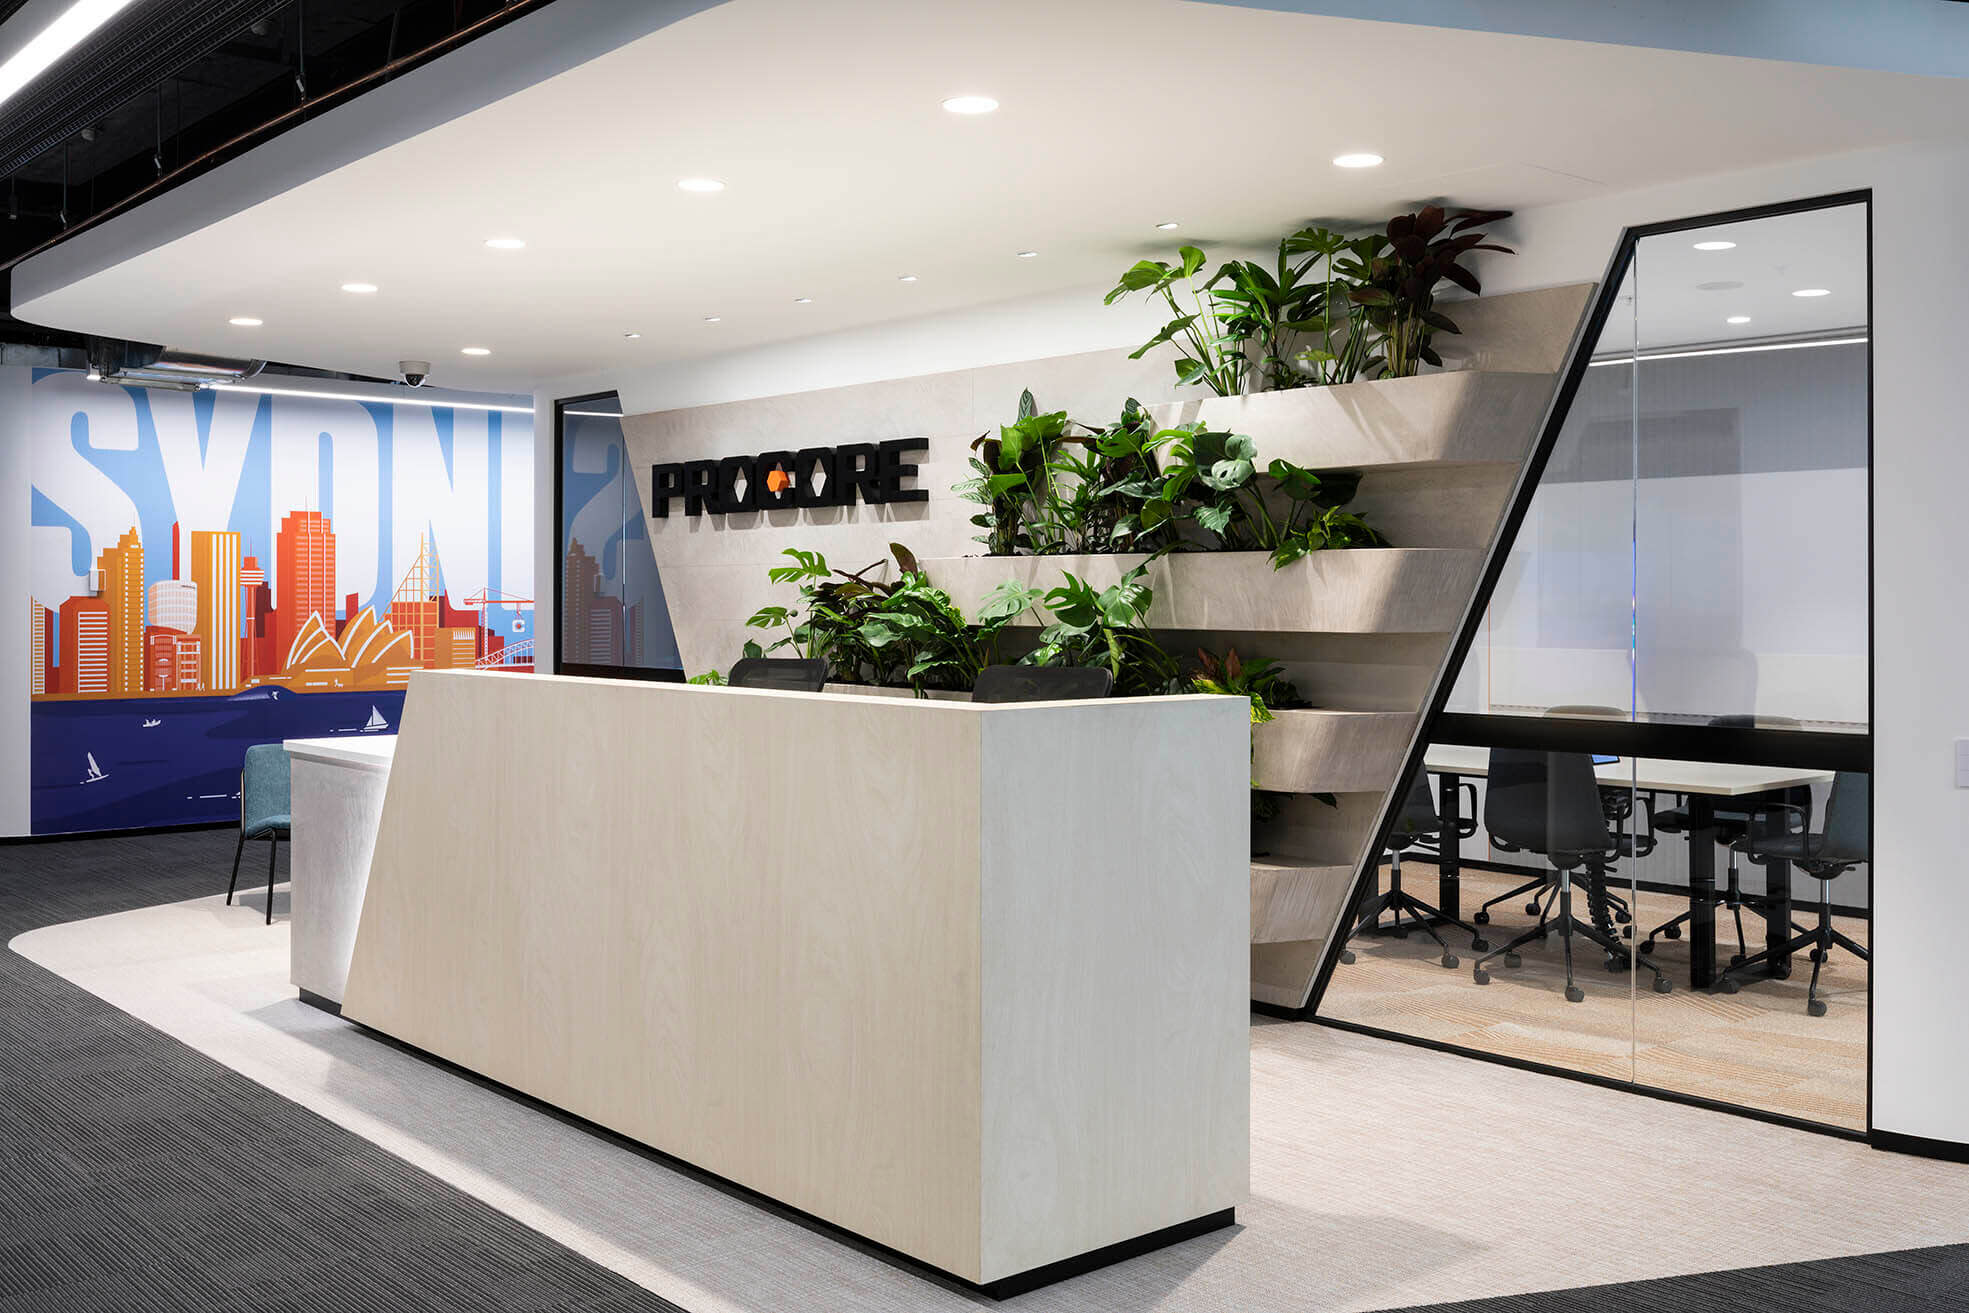 Reception desk at Procore's new office in Sydney